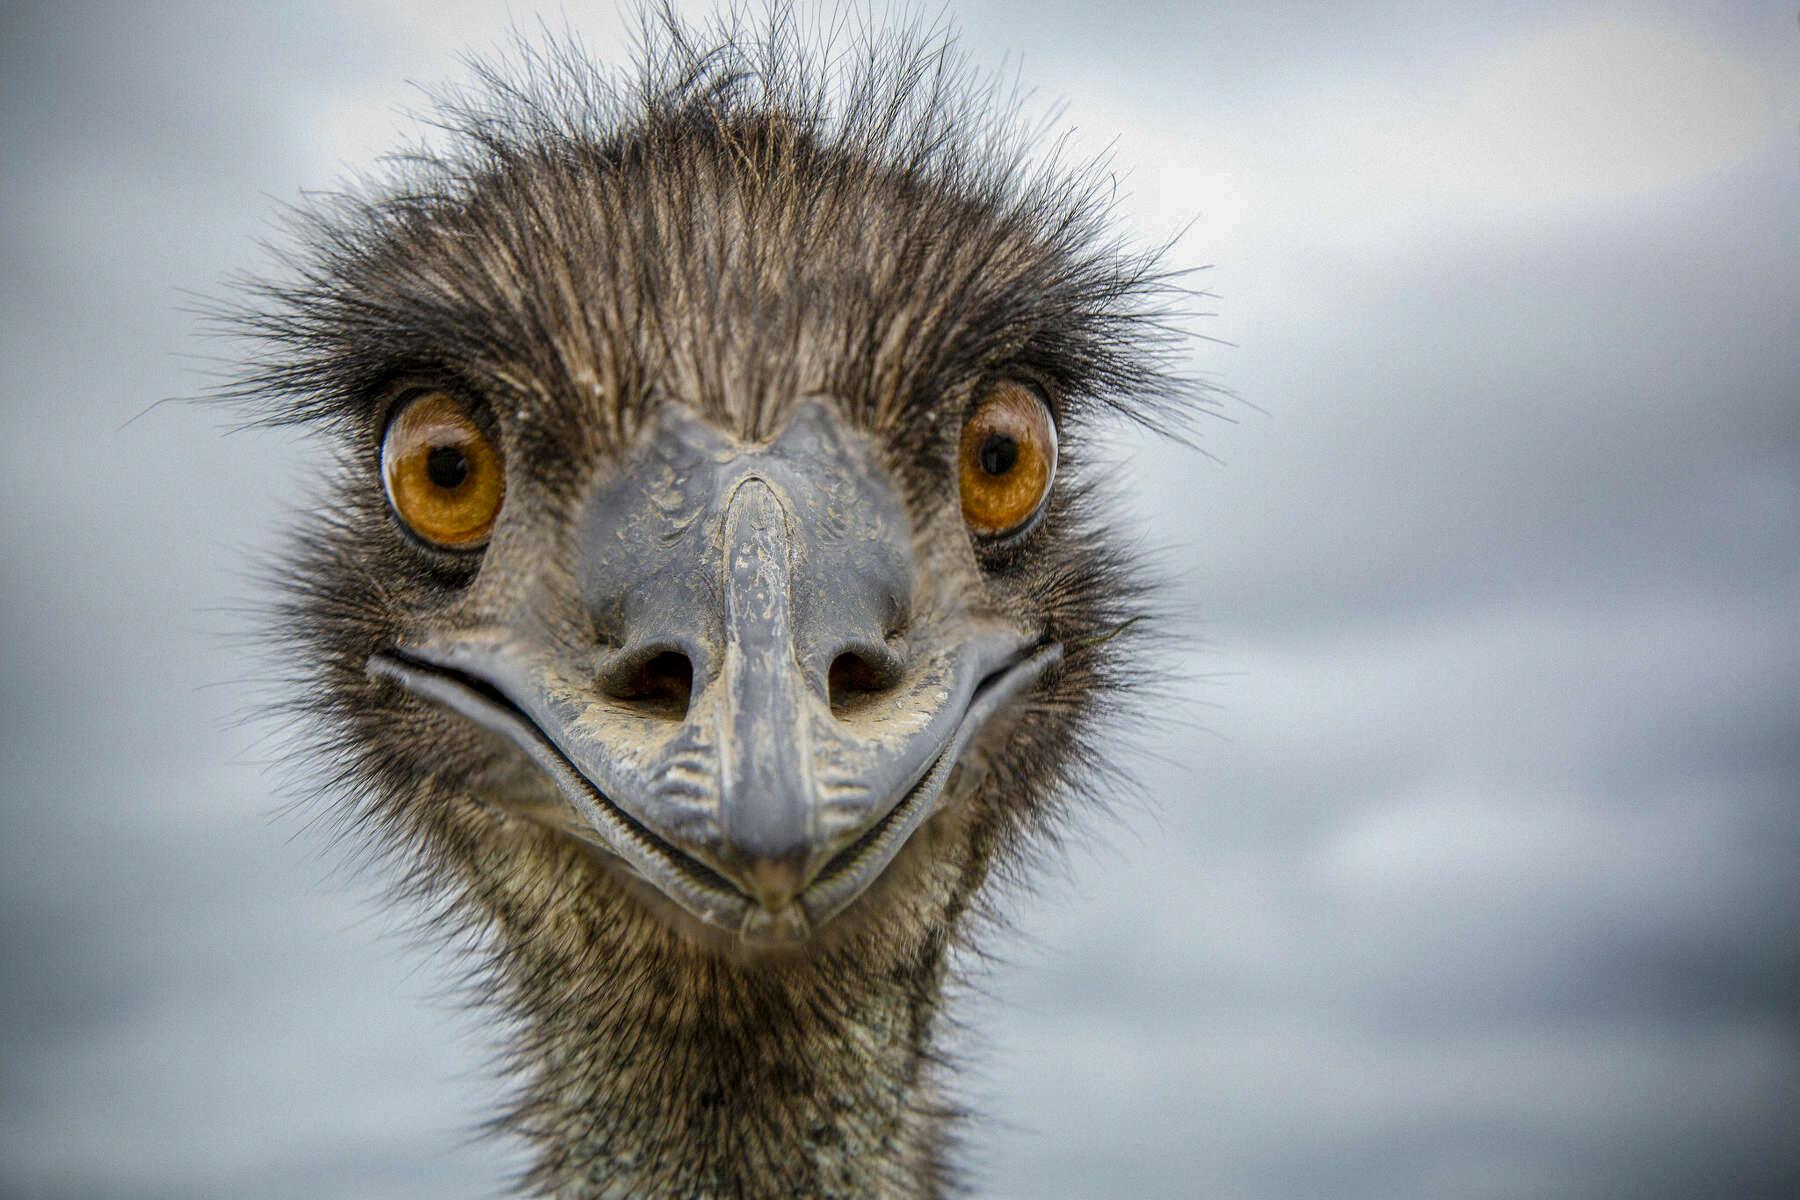 can emus fly